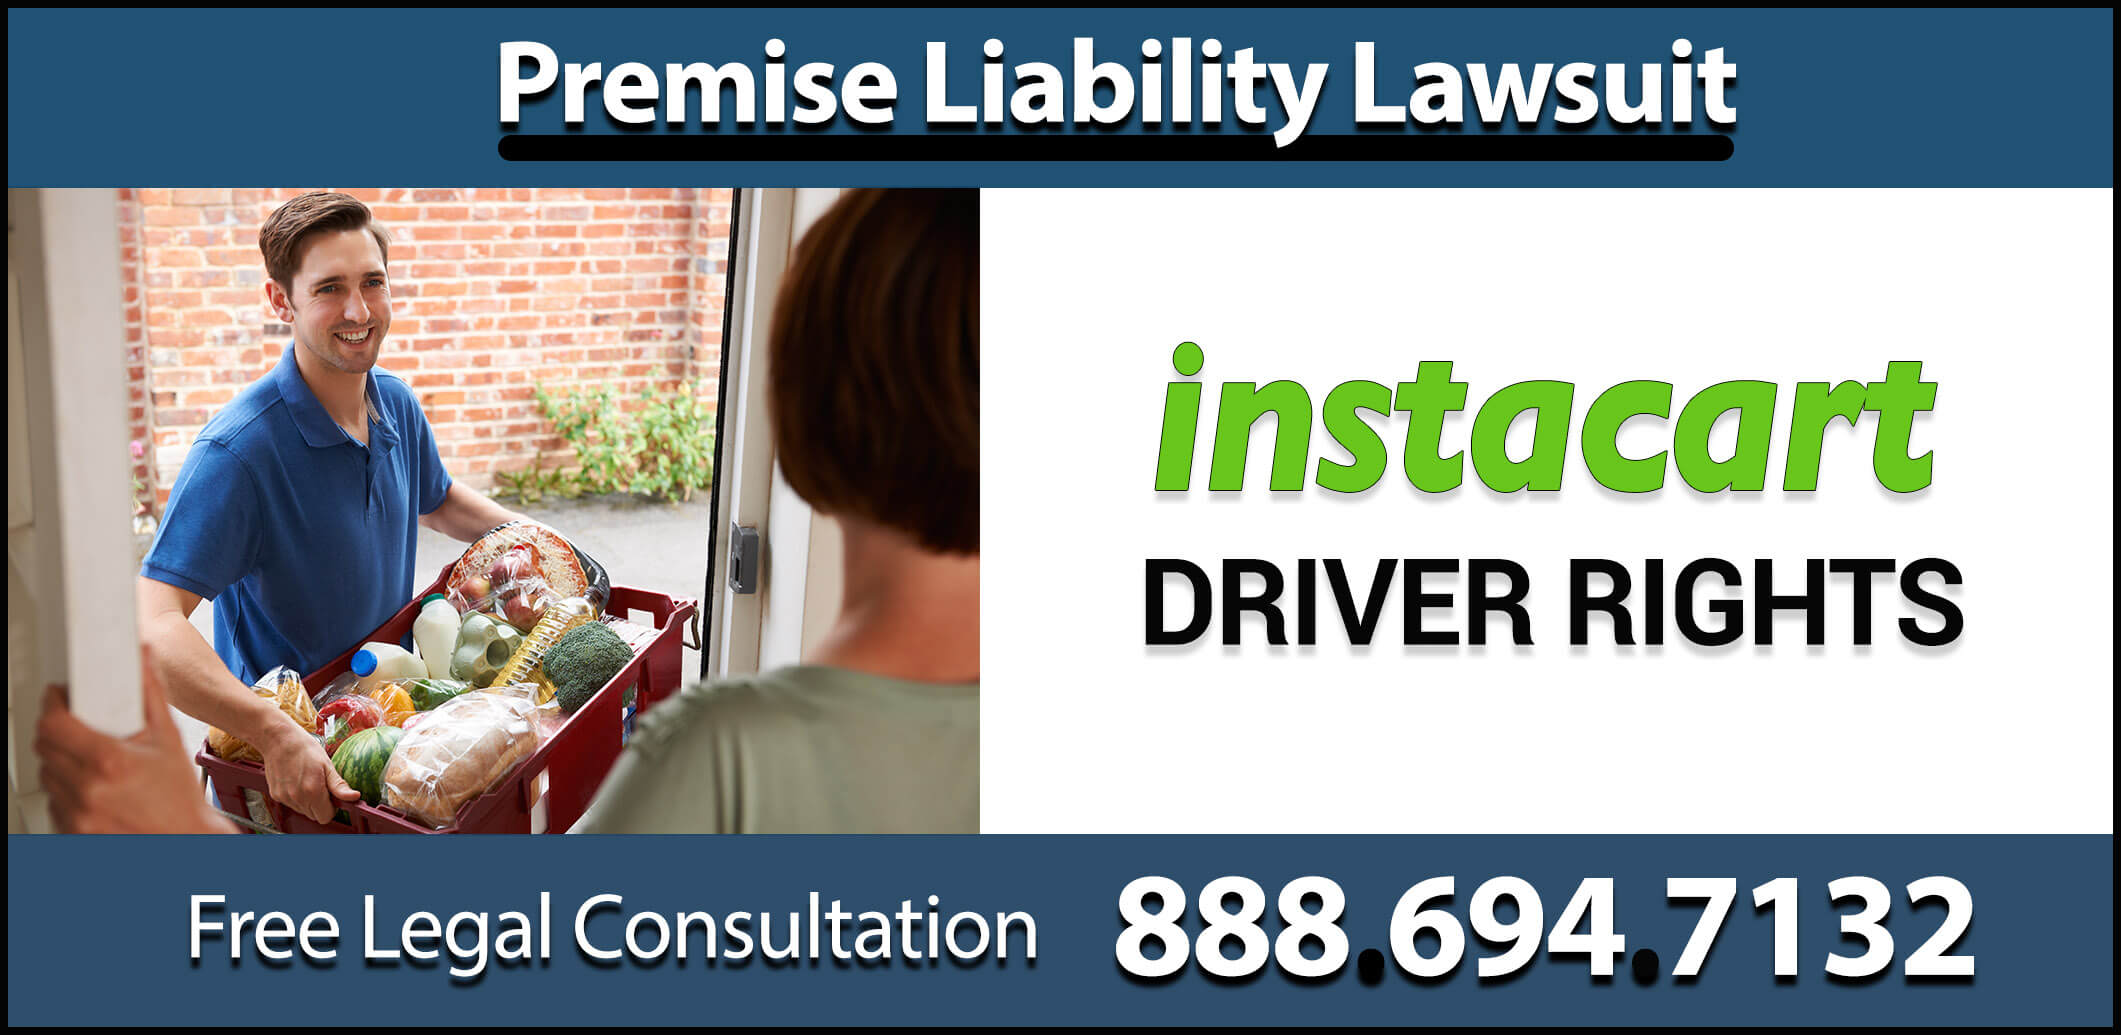 instacart driver rights premise liability lawsuit compensation accident incident lawyer attorney sue